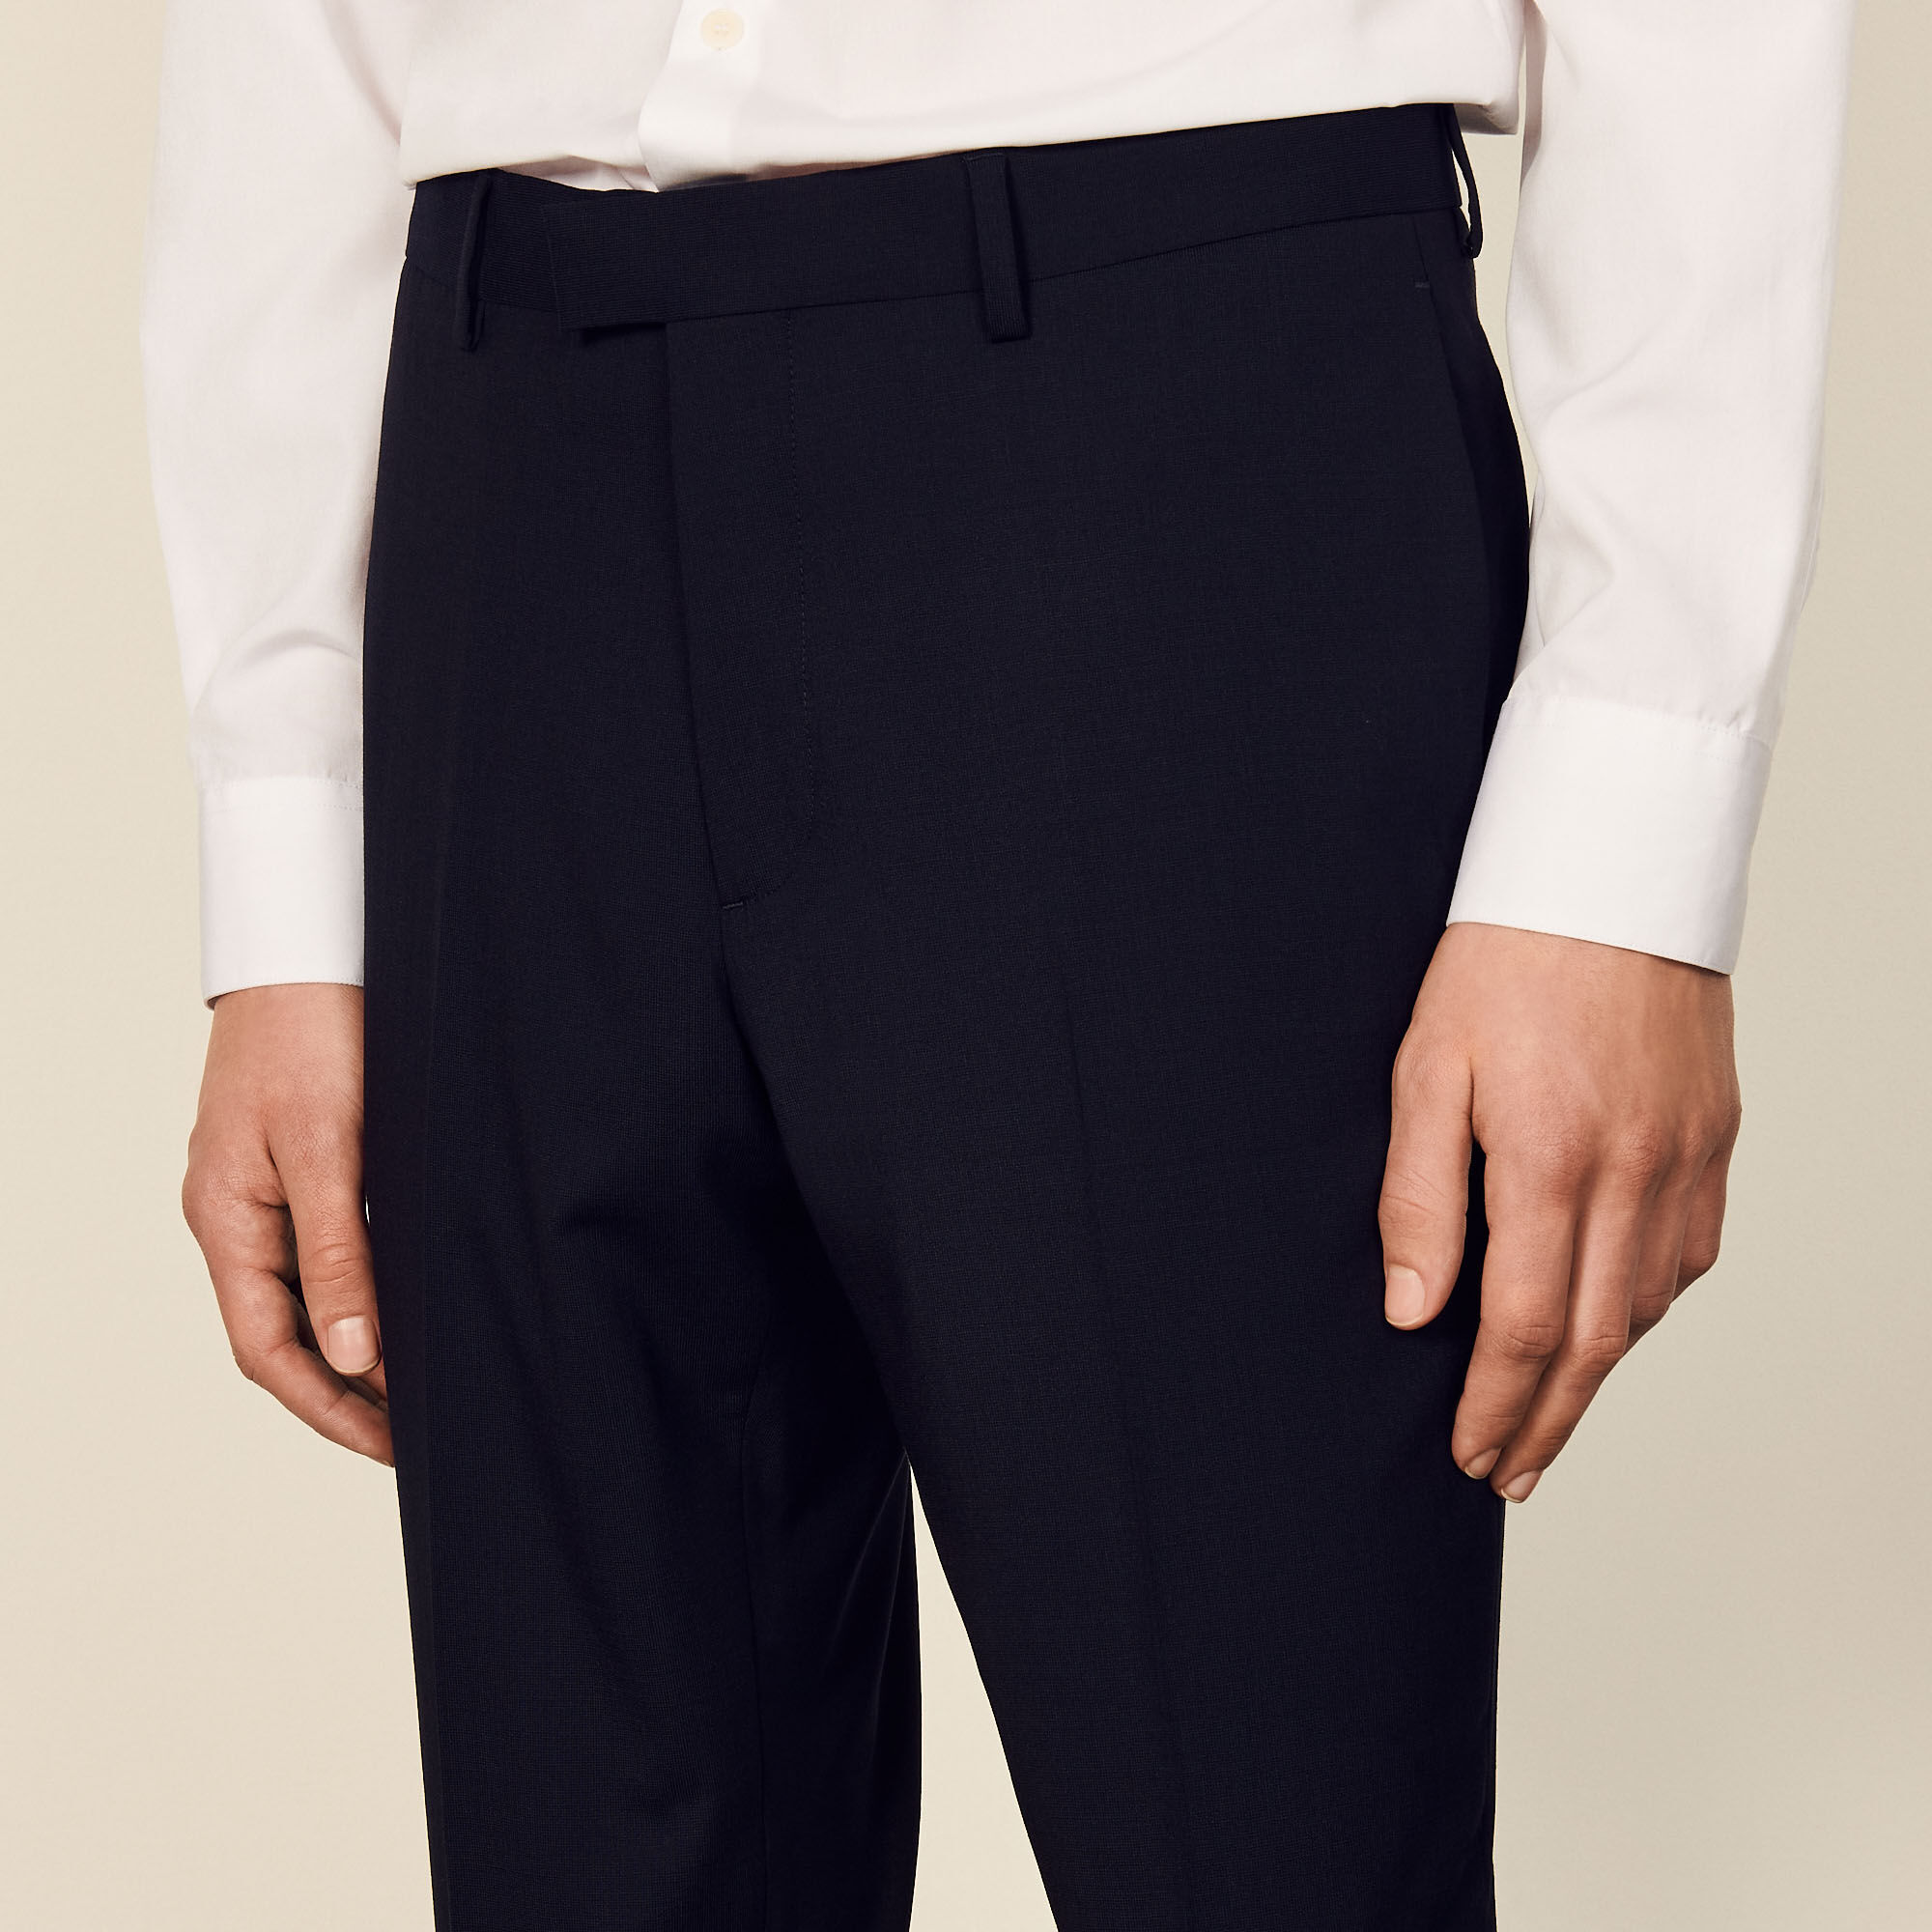 Classic wool suit pants Select a size and Login to add to Wish list